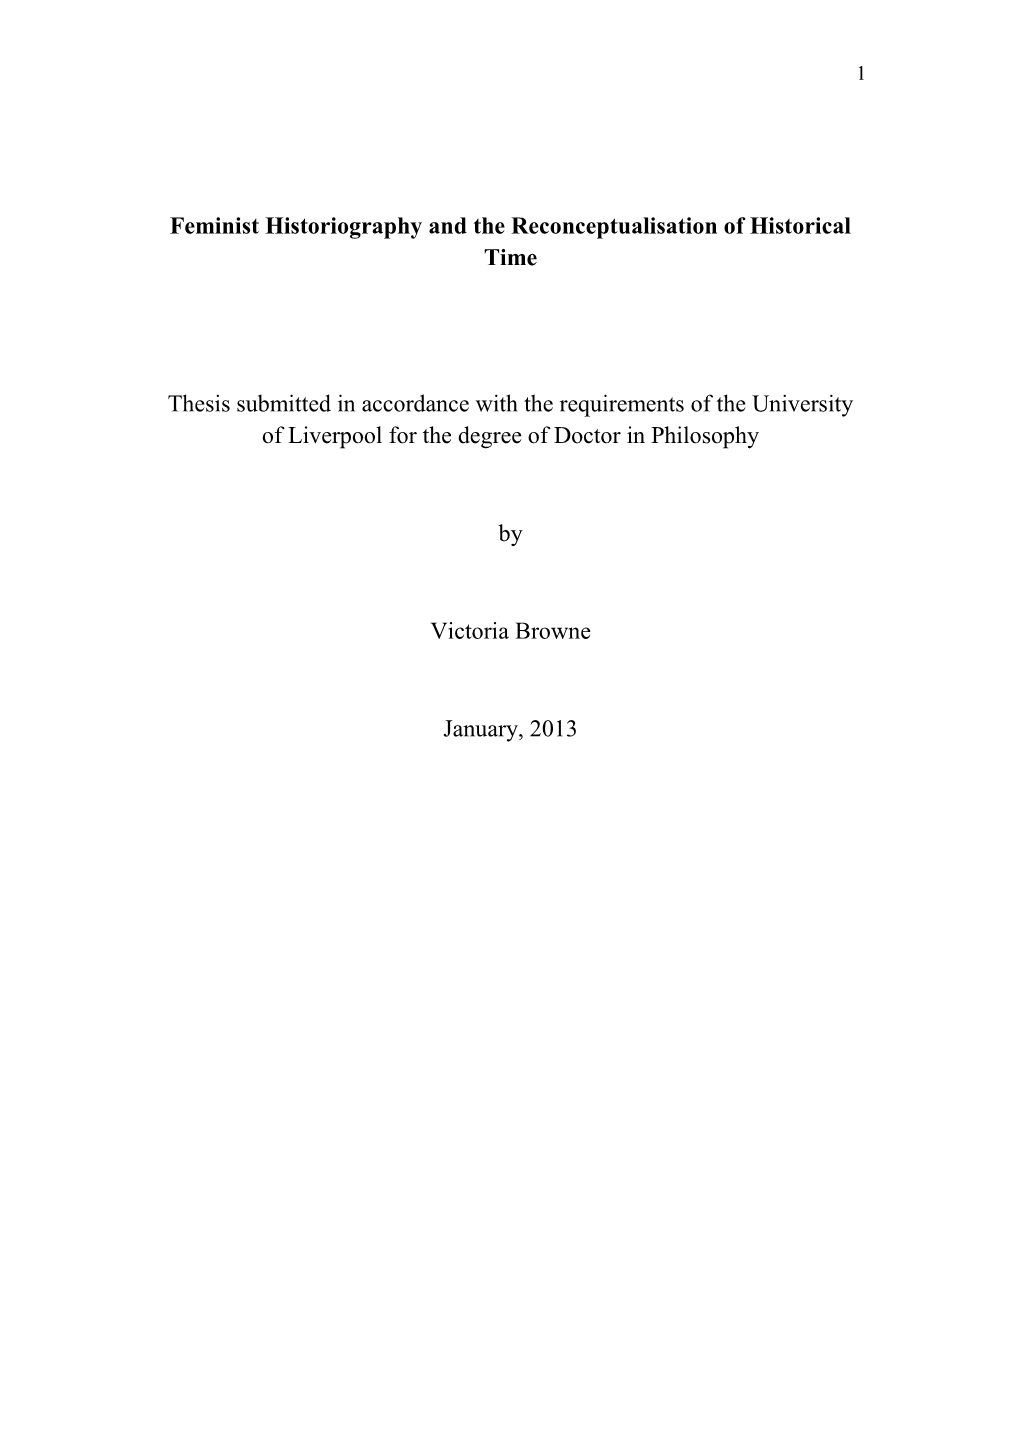 Feminist Historiography and the Reconceptualisation of Historical Time